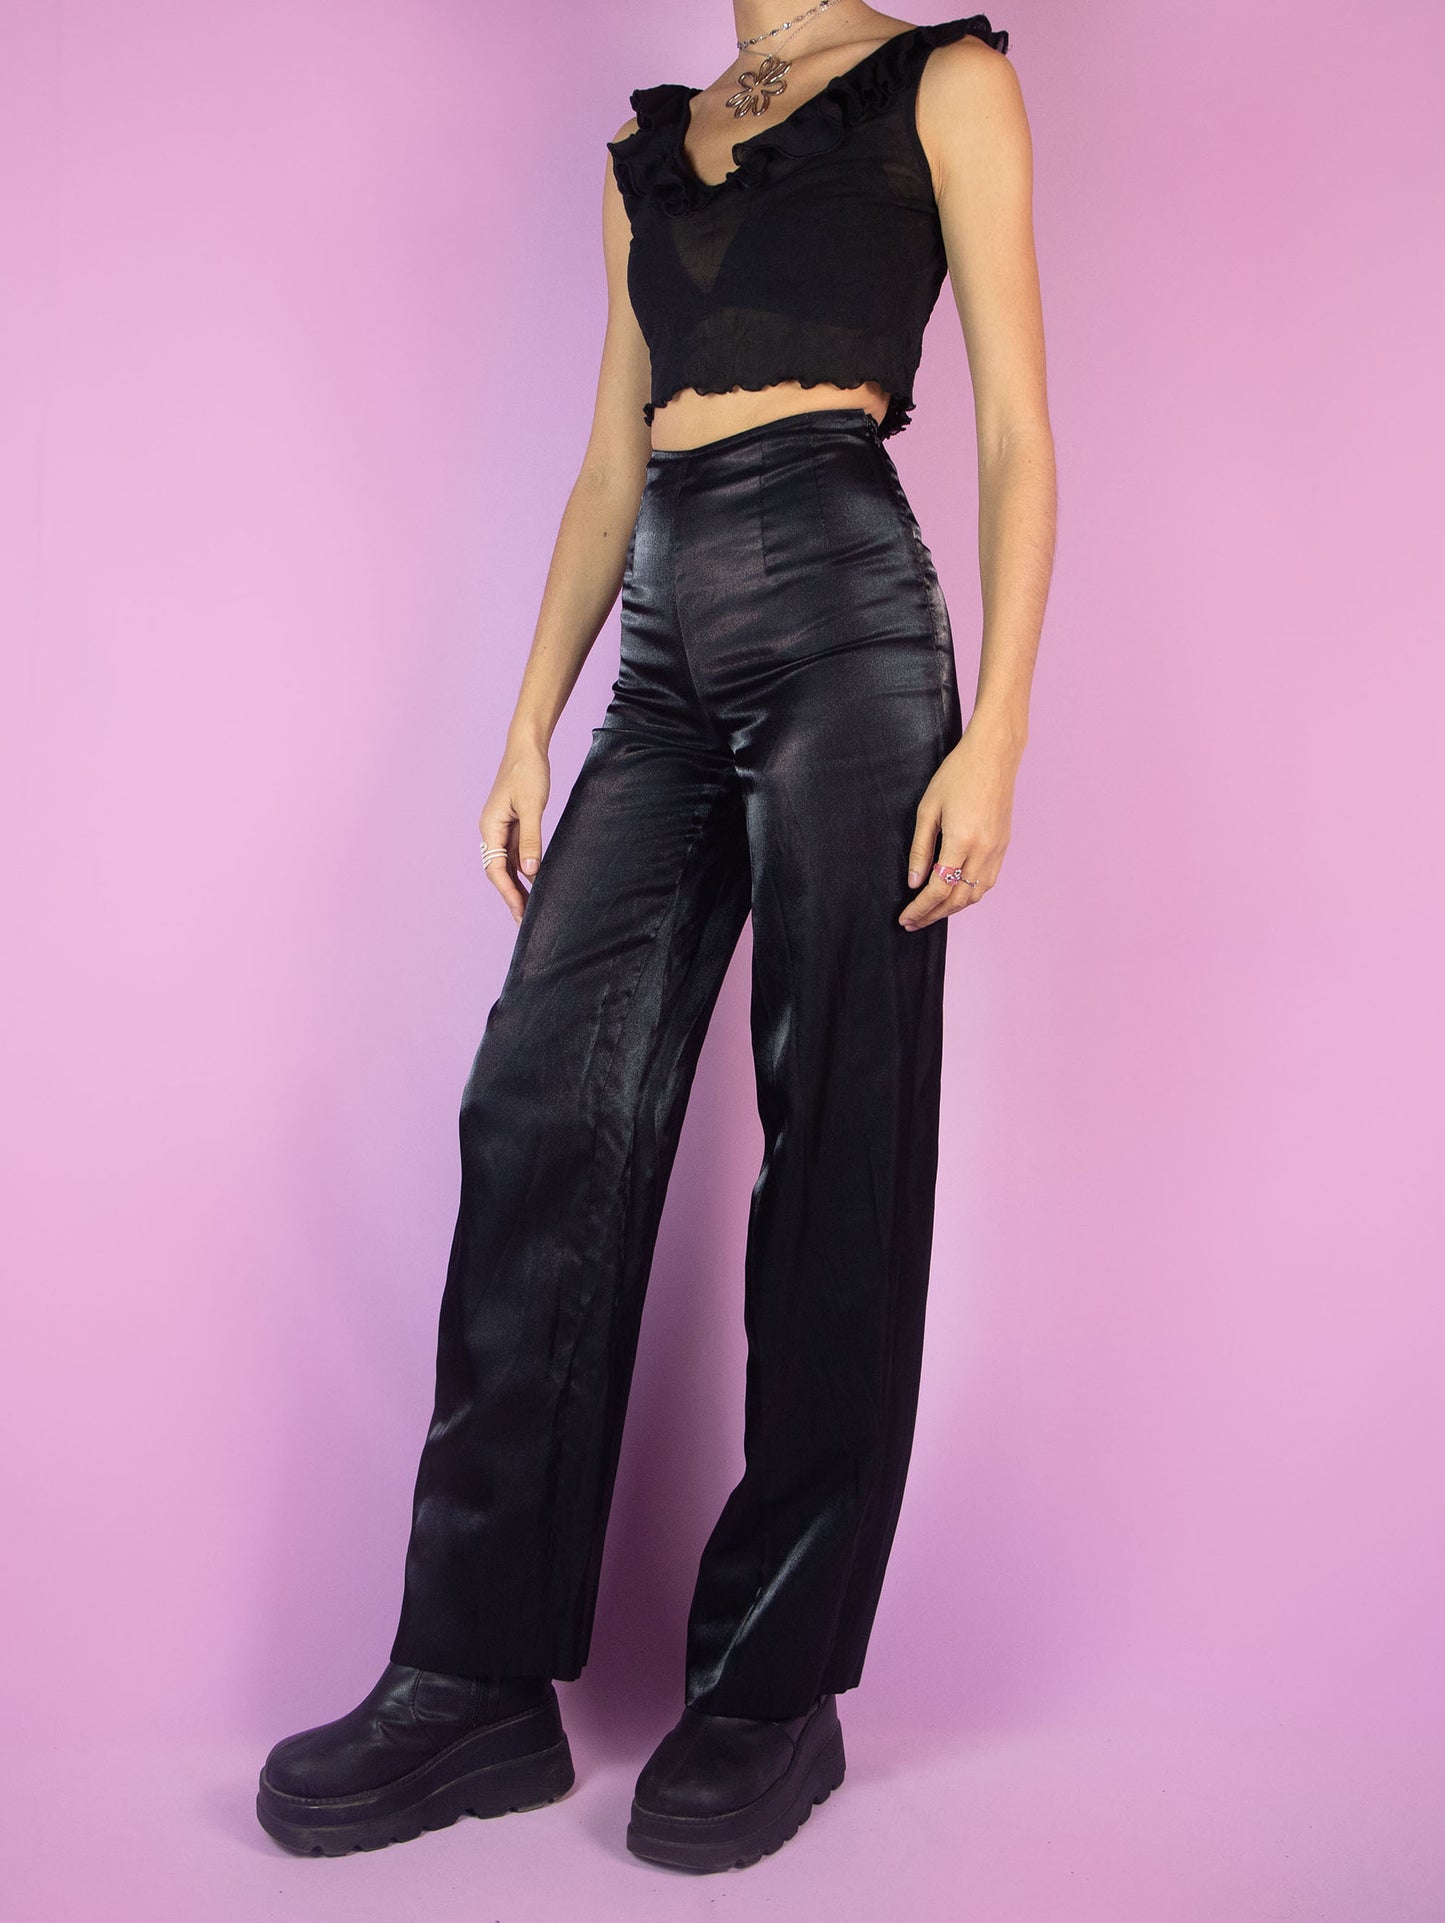 The Vintage 90s Black Tailored Wide Pants are shiny black iridescent pants with high-rise pleats, featuring a side zipper closure and wide legs. Elegant evening party 1990s classic pleated trousers.